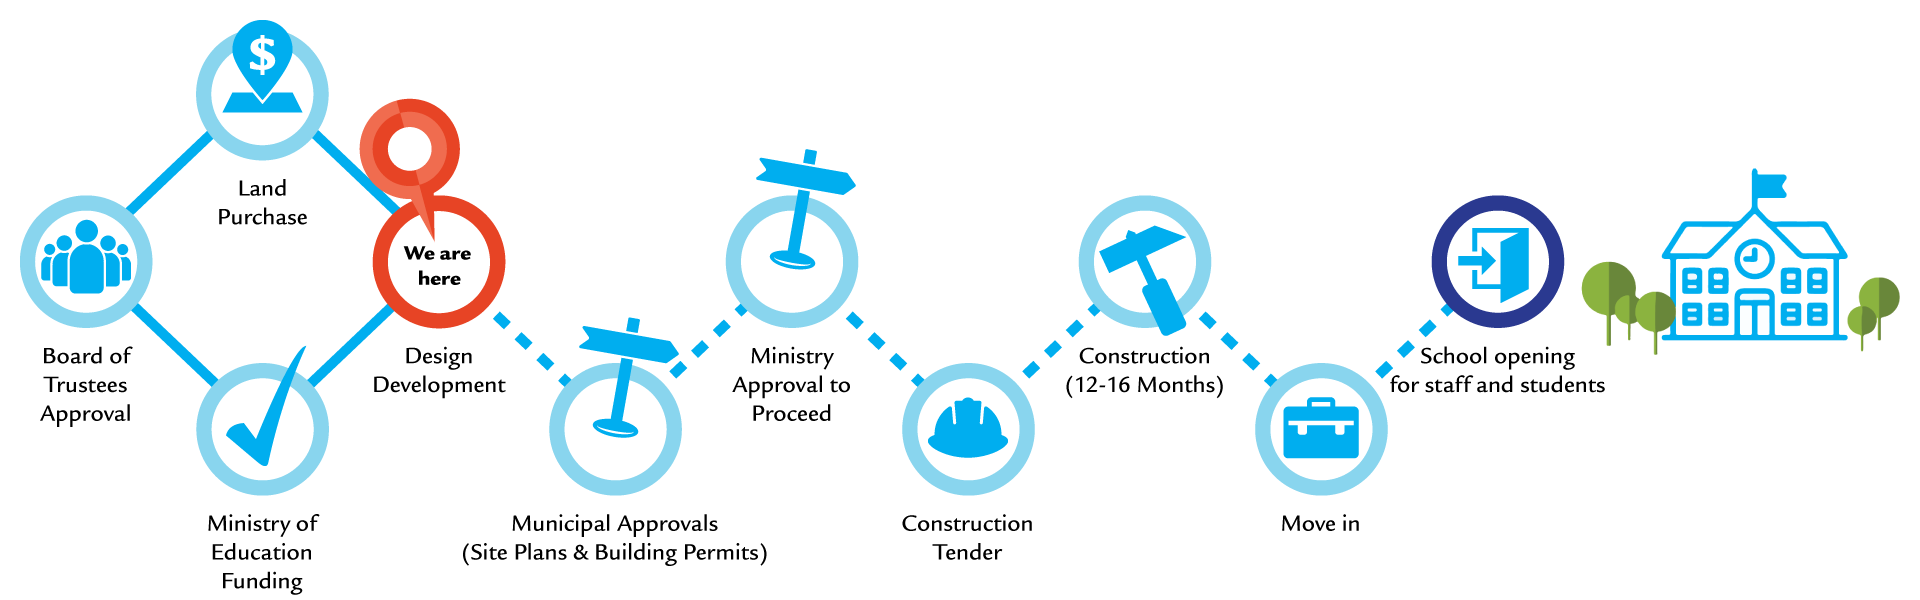 Timeline of construction stages - now at Design Development